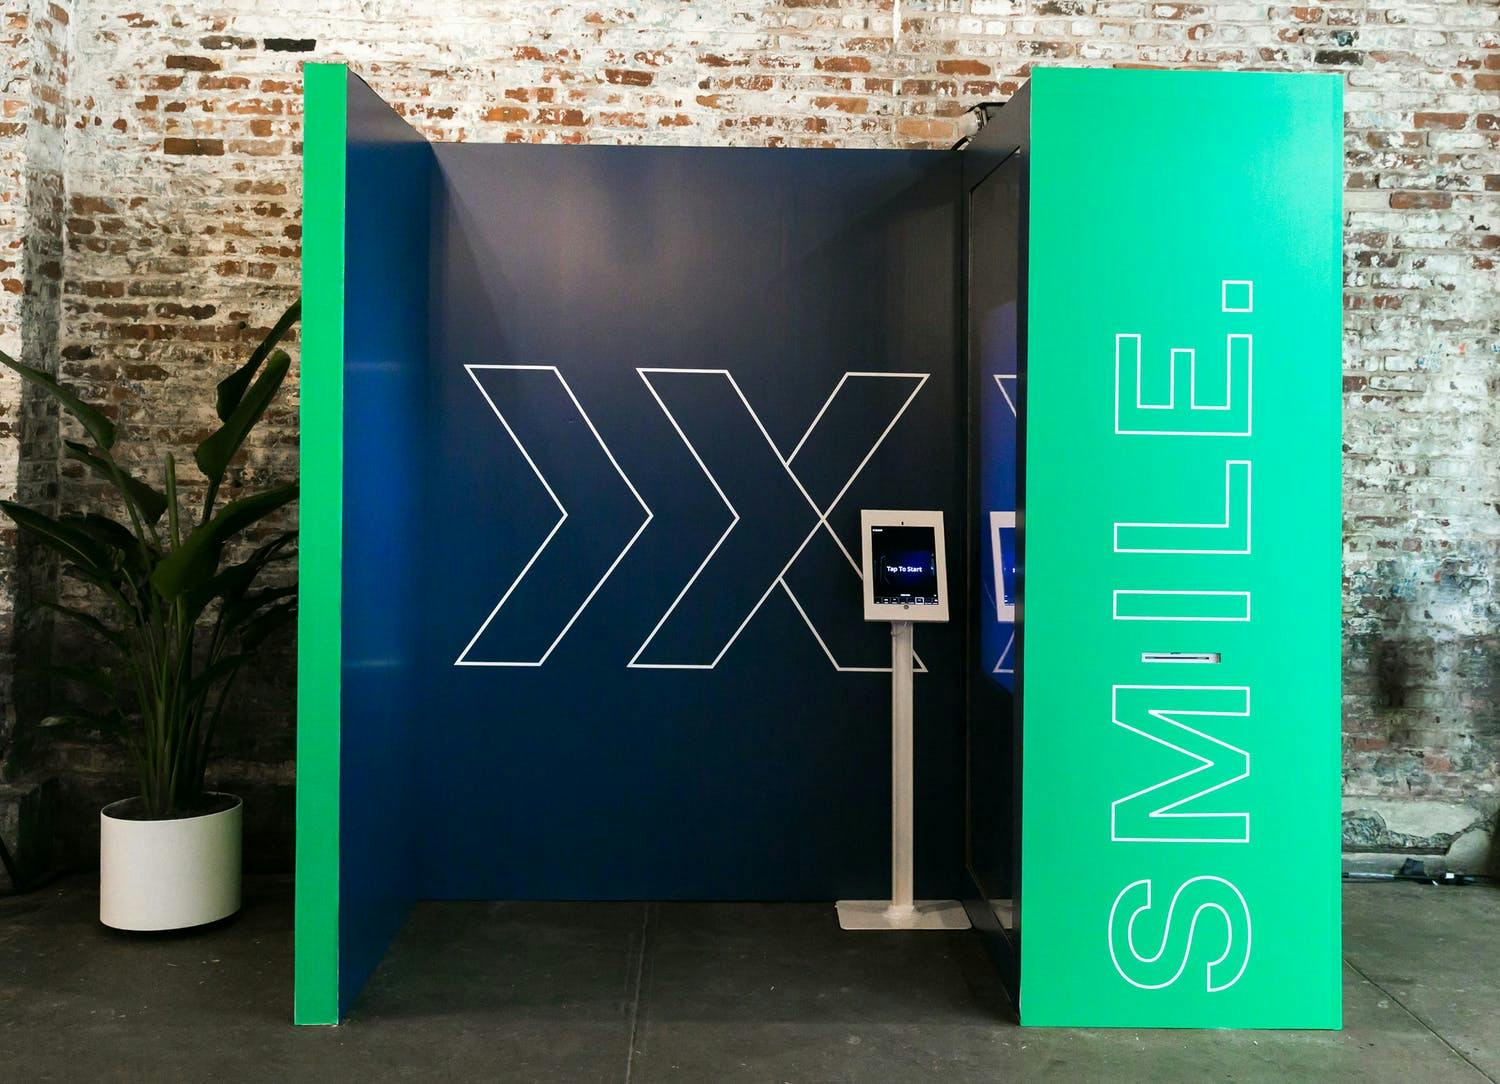 Corporate event with green and black selfie station with Now + Next branding design | PartySlate